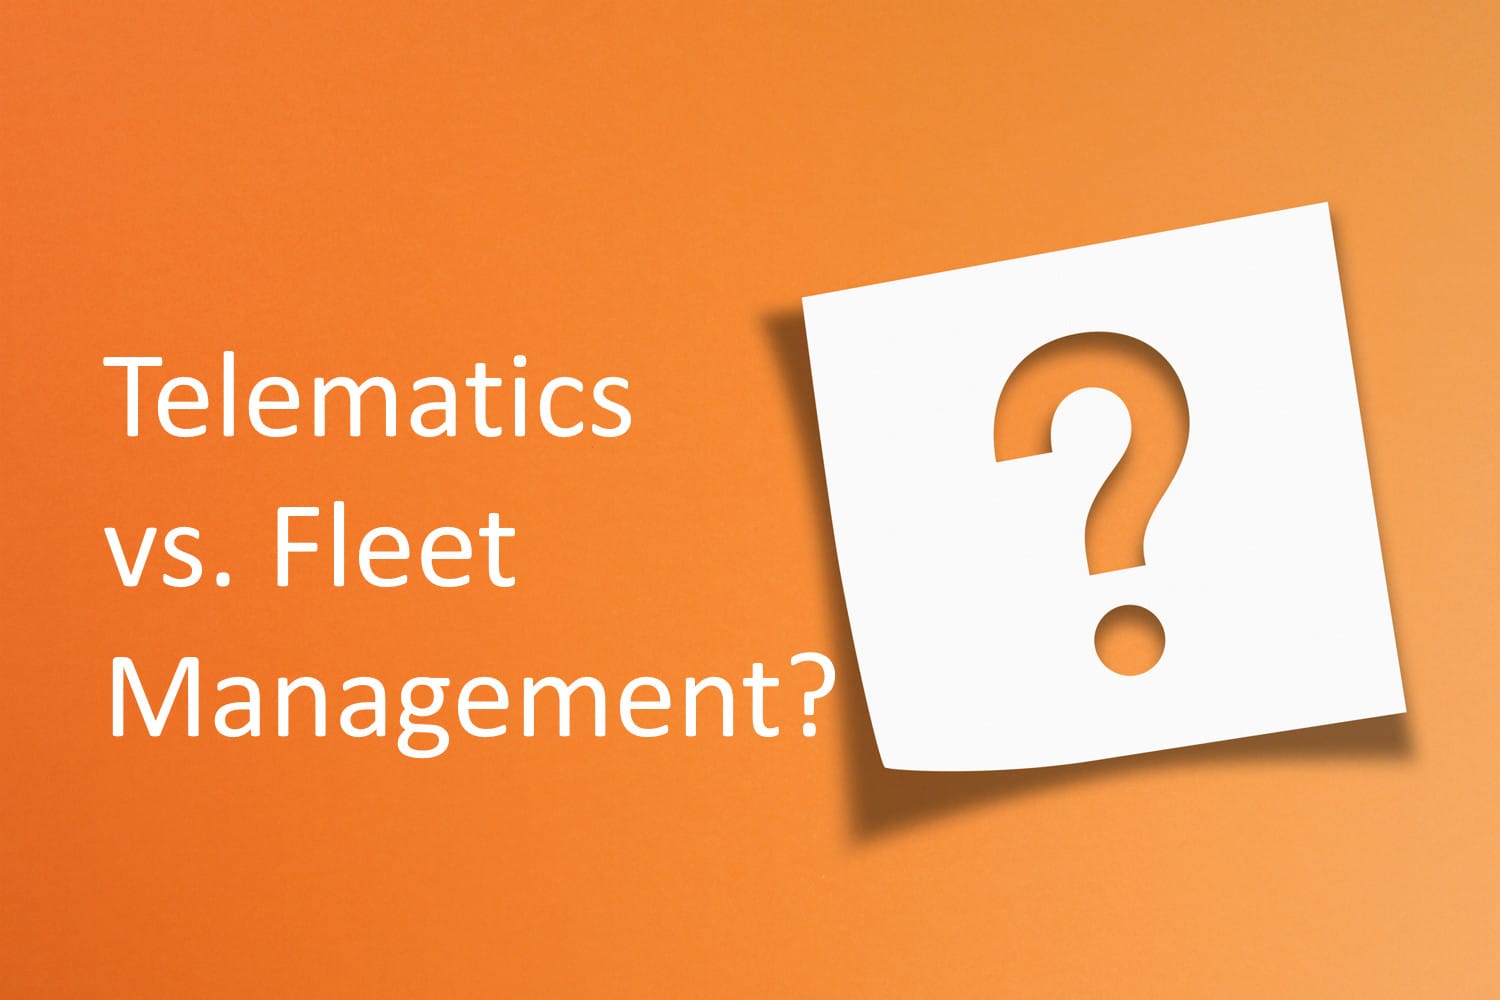 How is Fleet Management Different from Telematics